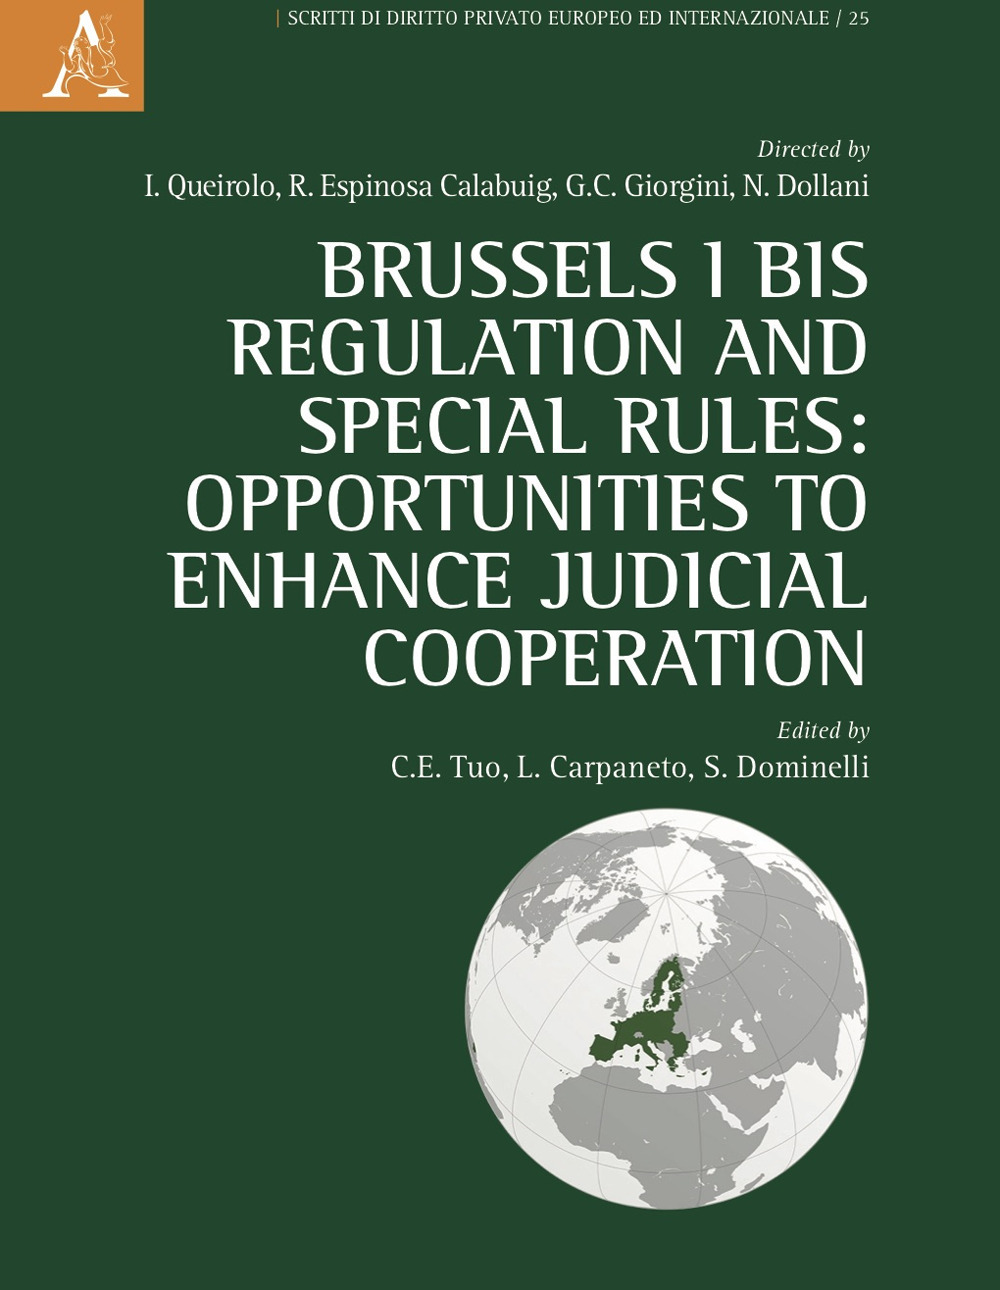 Brussels I bis Regulation and Special Rules. Opportunities to Enhance Judicial Cooperation